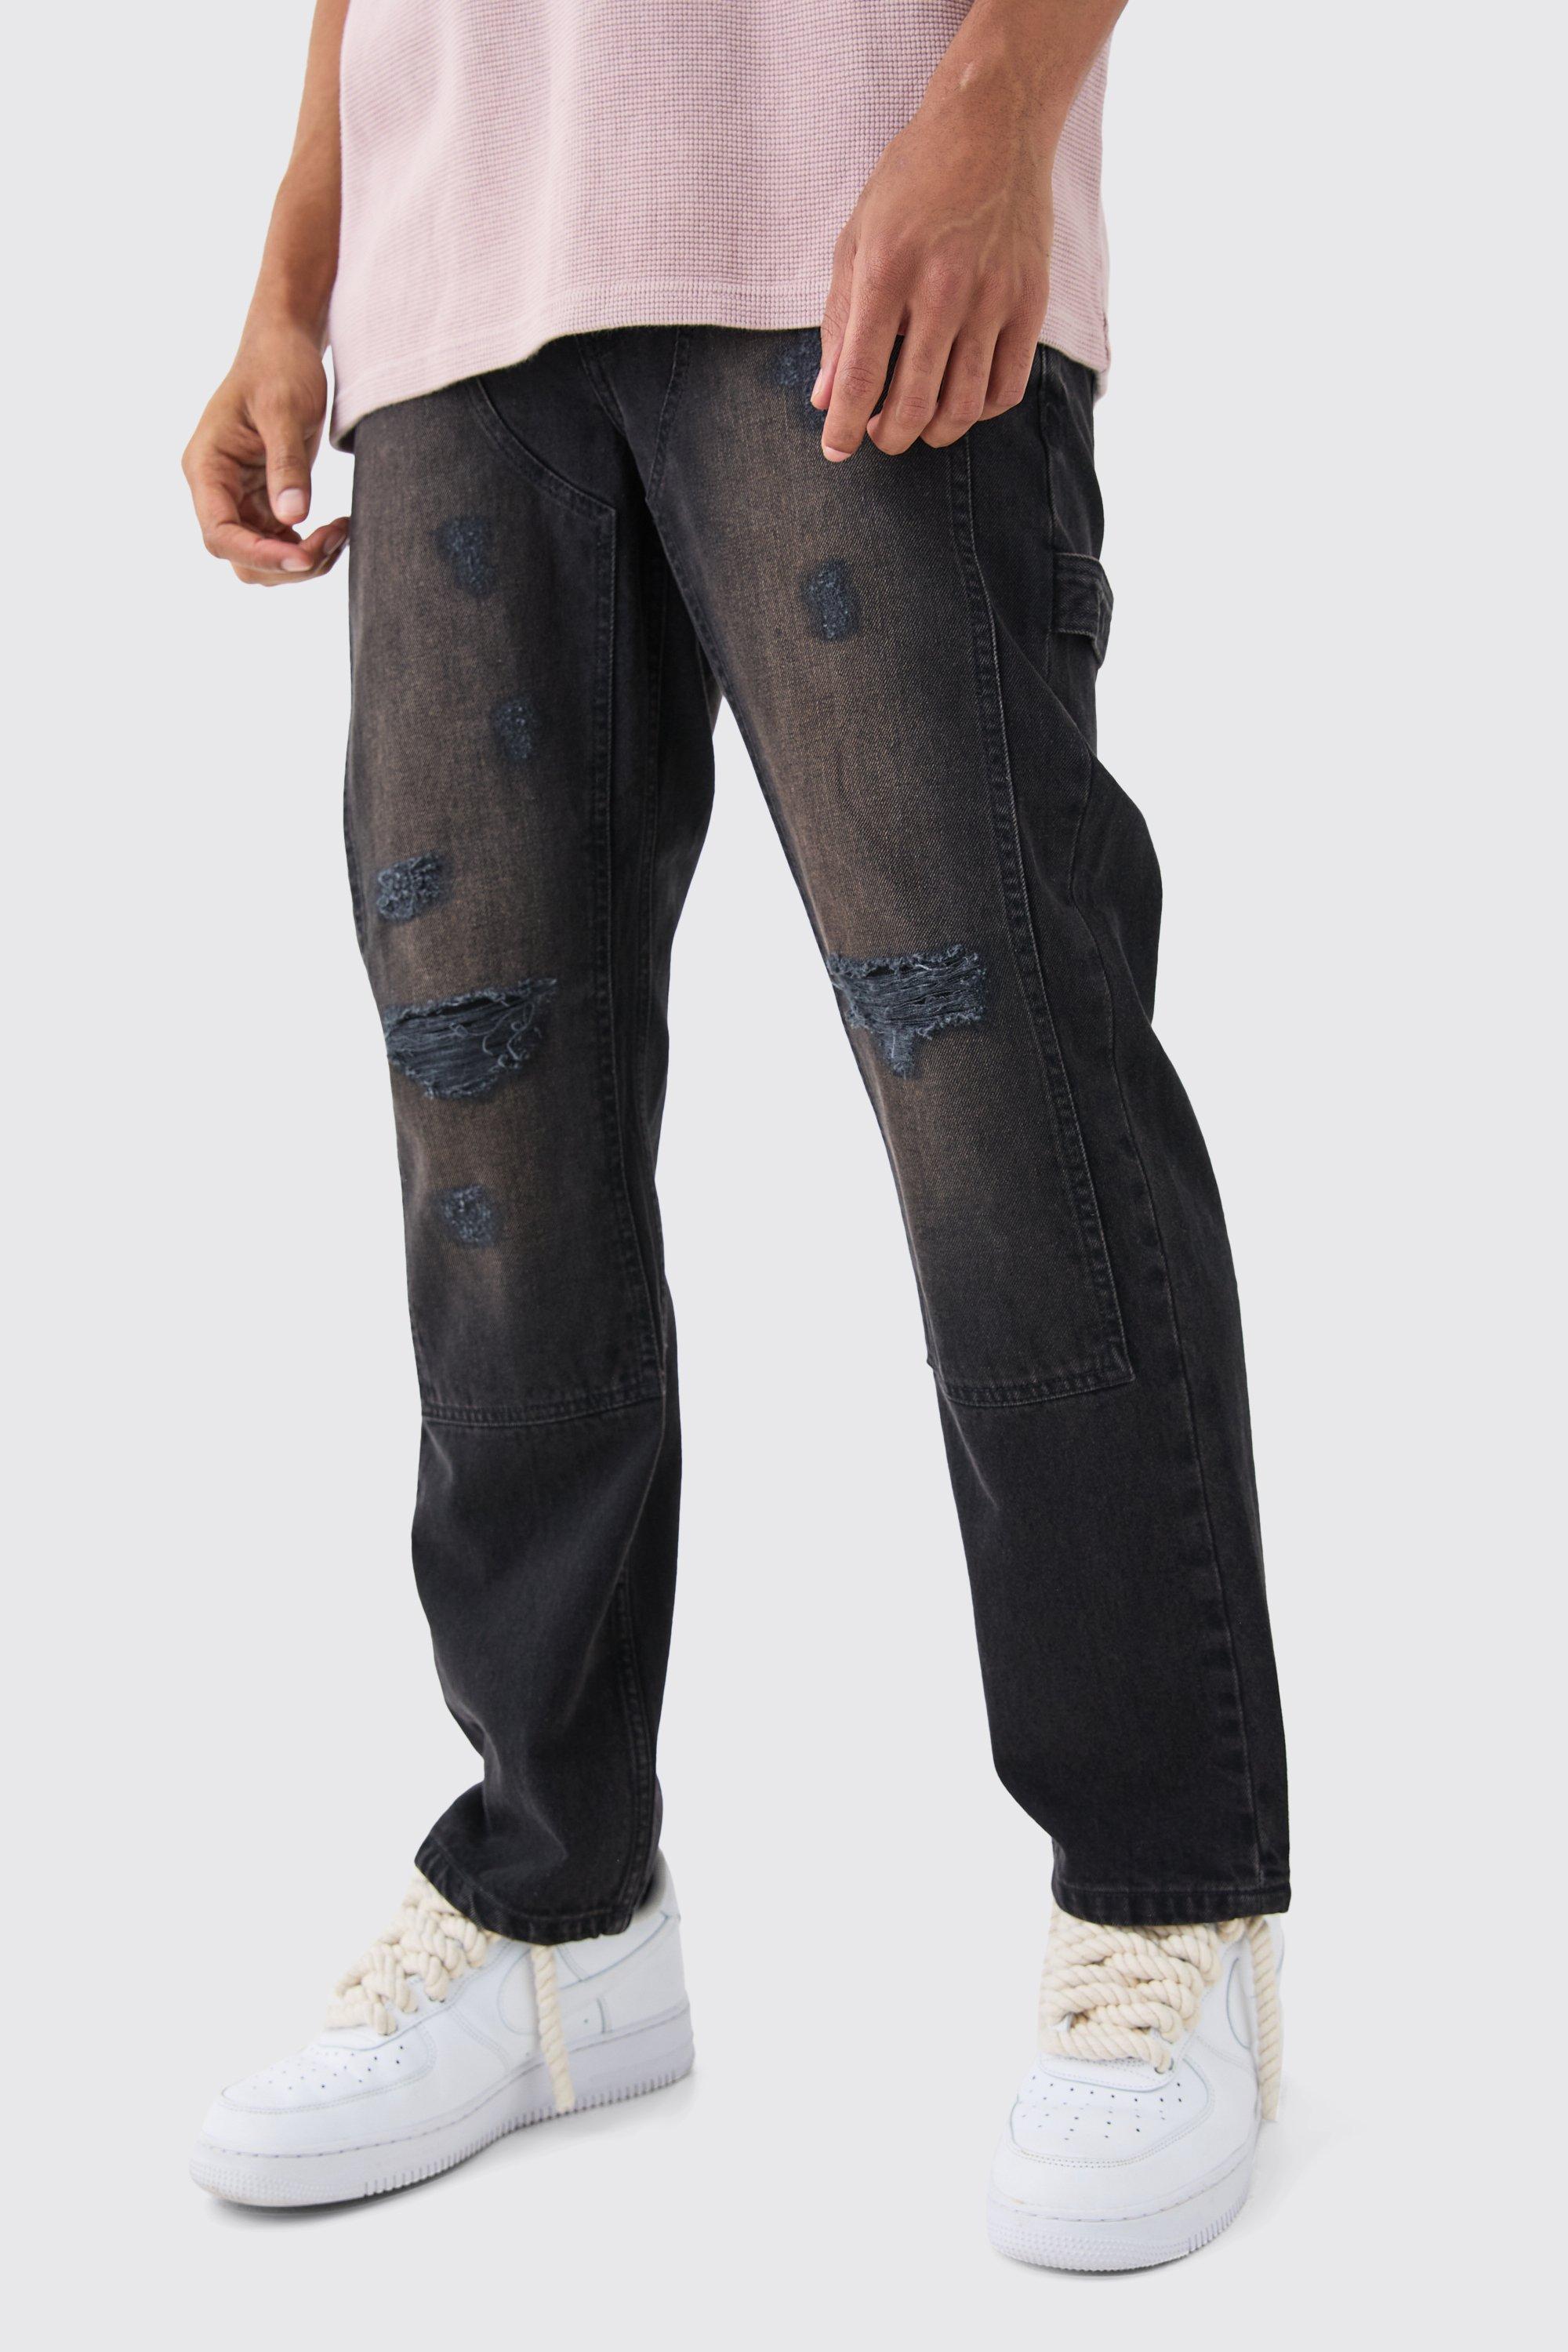 Image of Relaxed Rigid Ripped Knee Carpenter Jeans In Washed Black, Nero